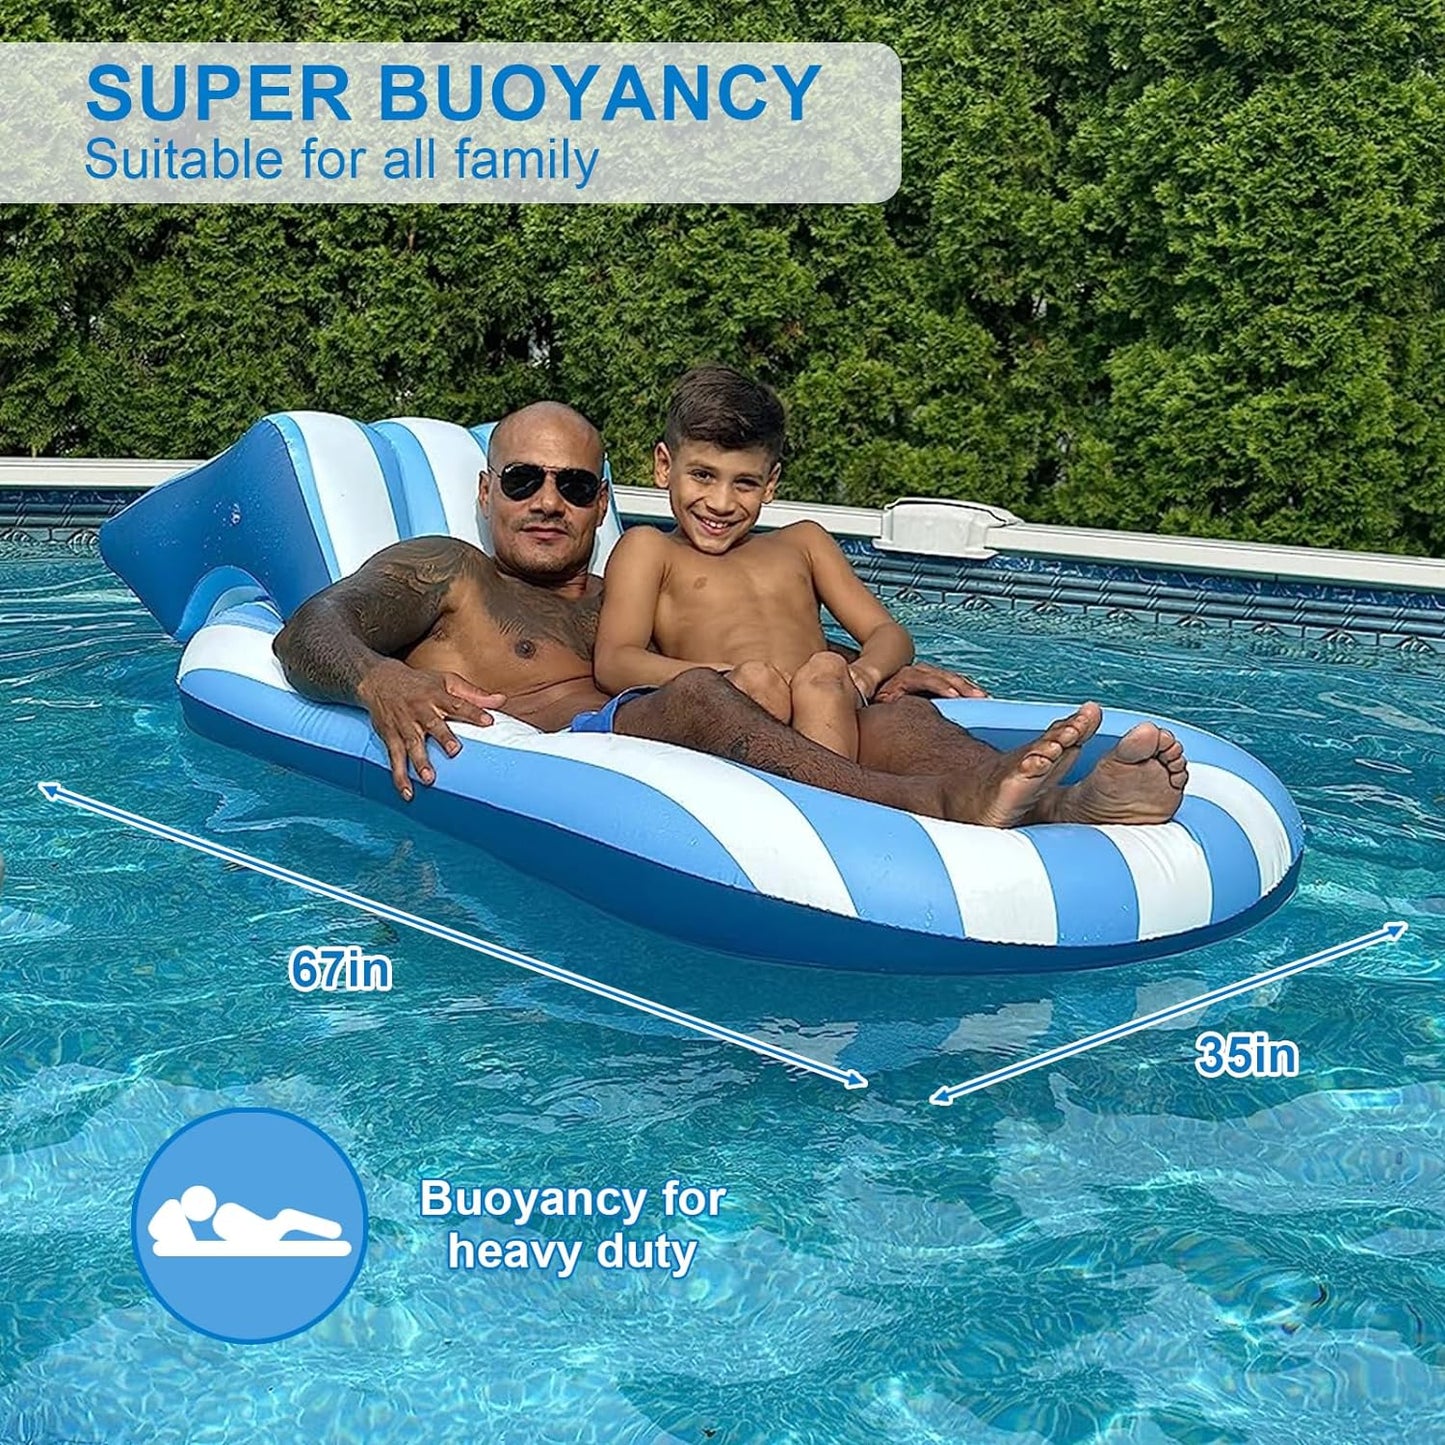 Pool Floats Adult Size, Inflatable Rafts Pool Lounger with Headrest & Cup Holder, Large Pool Floaties for Adult Heavy Duty Swimming Pool, Beach & Lake Sunbathing